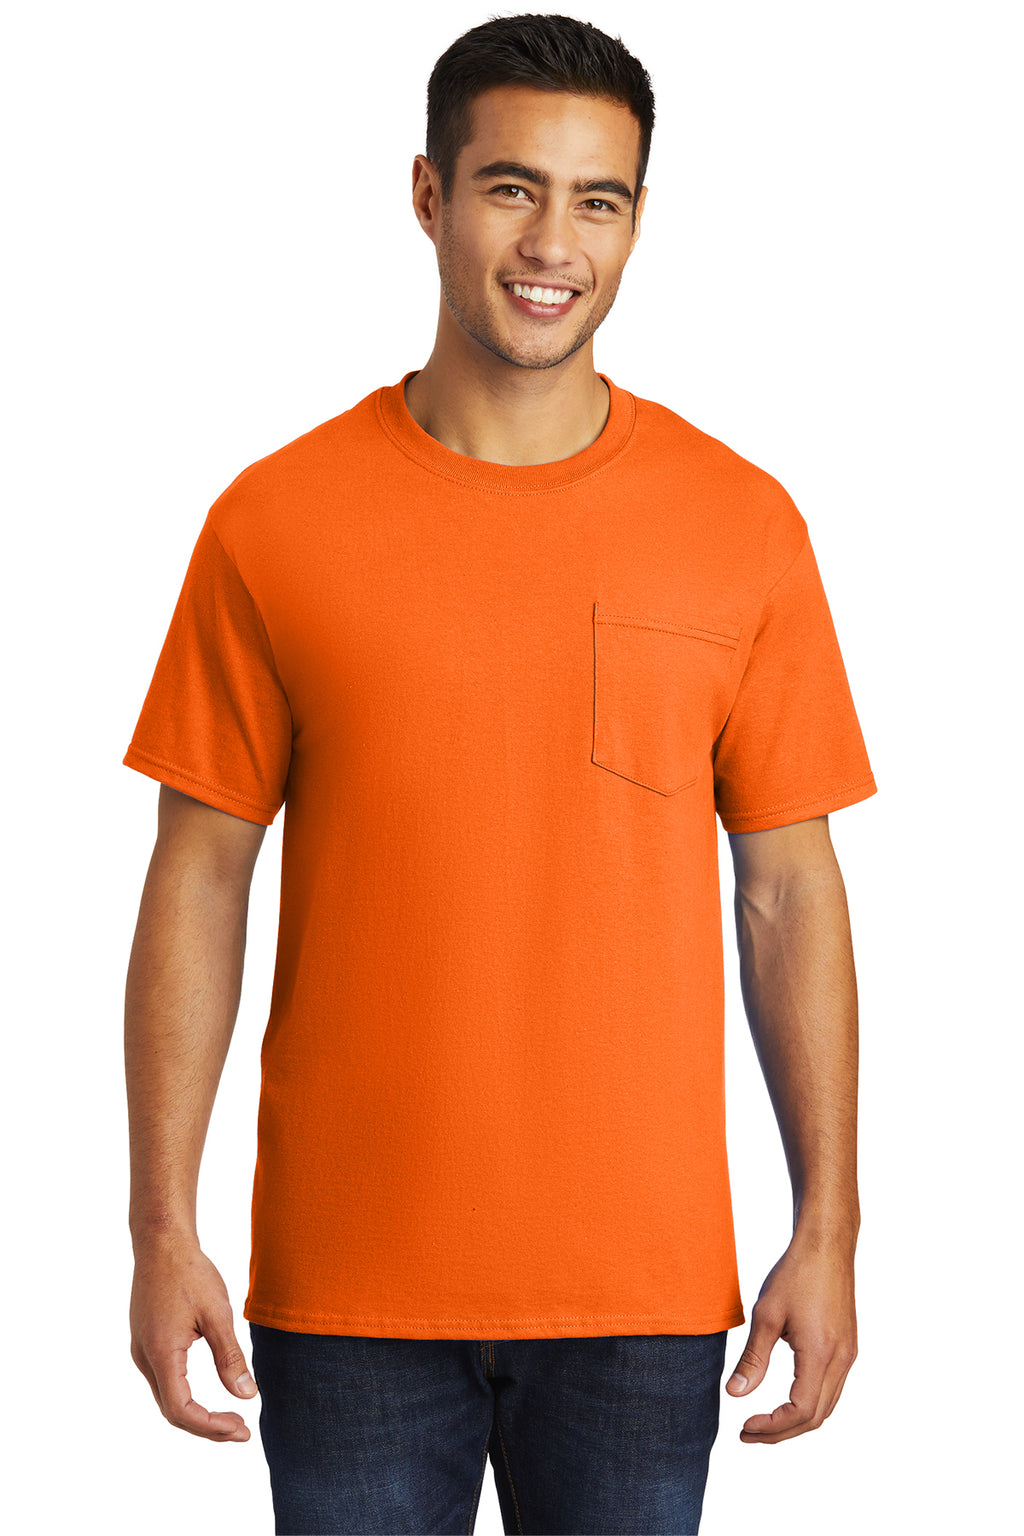 Port & Company Safety Color Heavyweight Cotton Pocket Tee Shirt-2